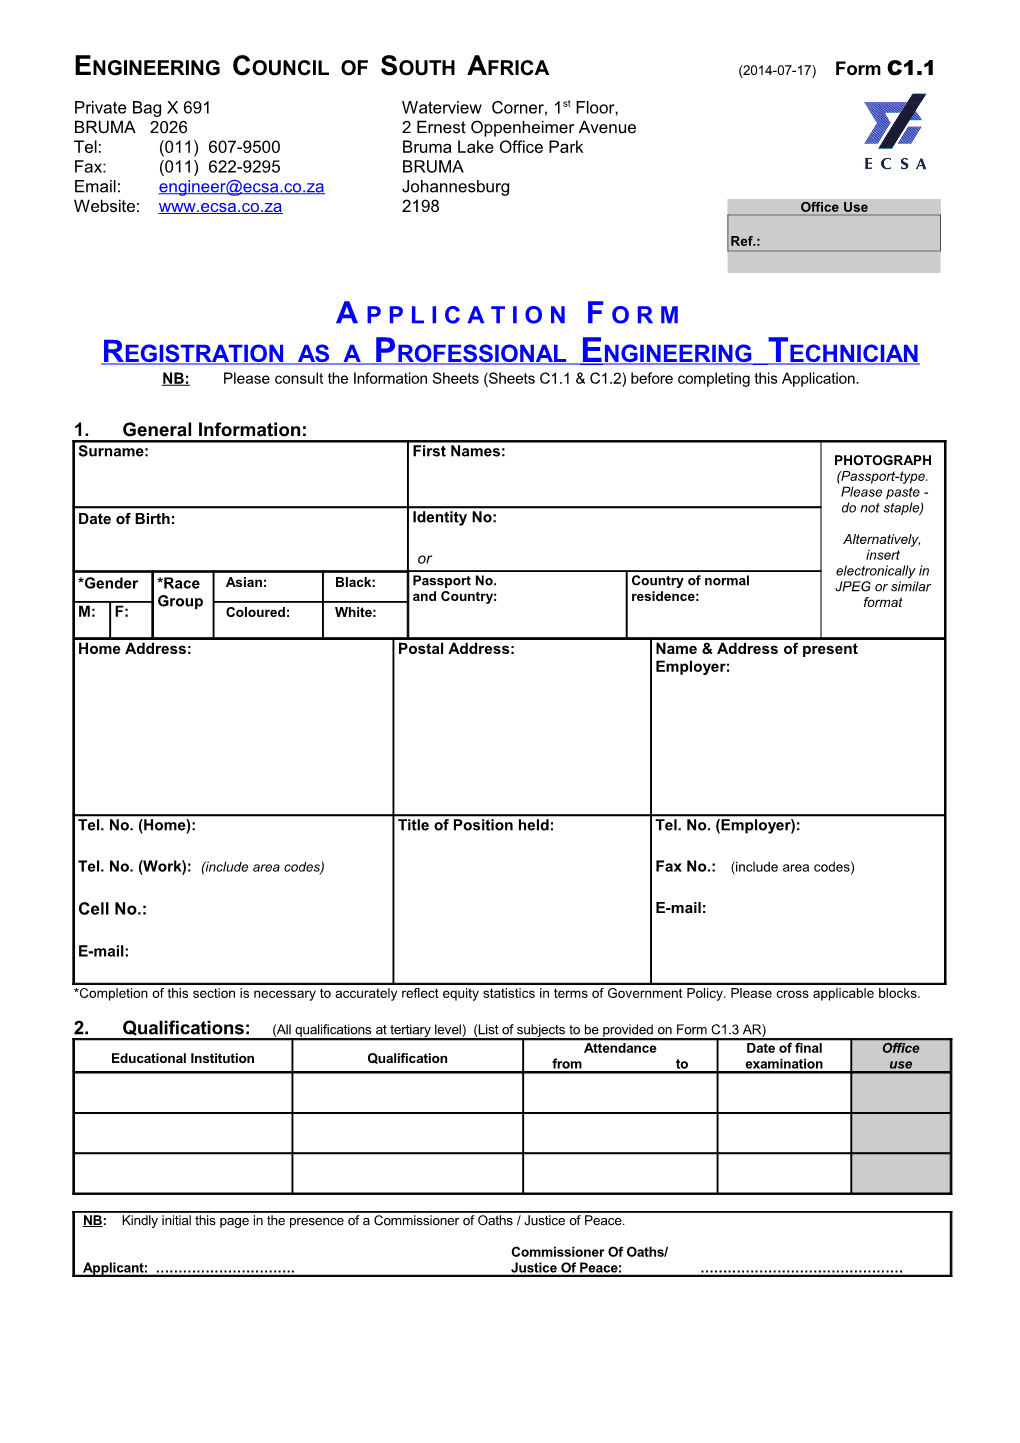 ENGINEERING COUNCIL of SOUTH AFRICA(2014-07-17) Form C1.1